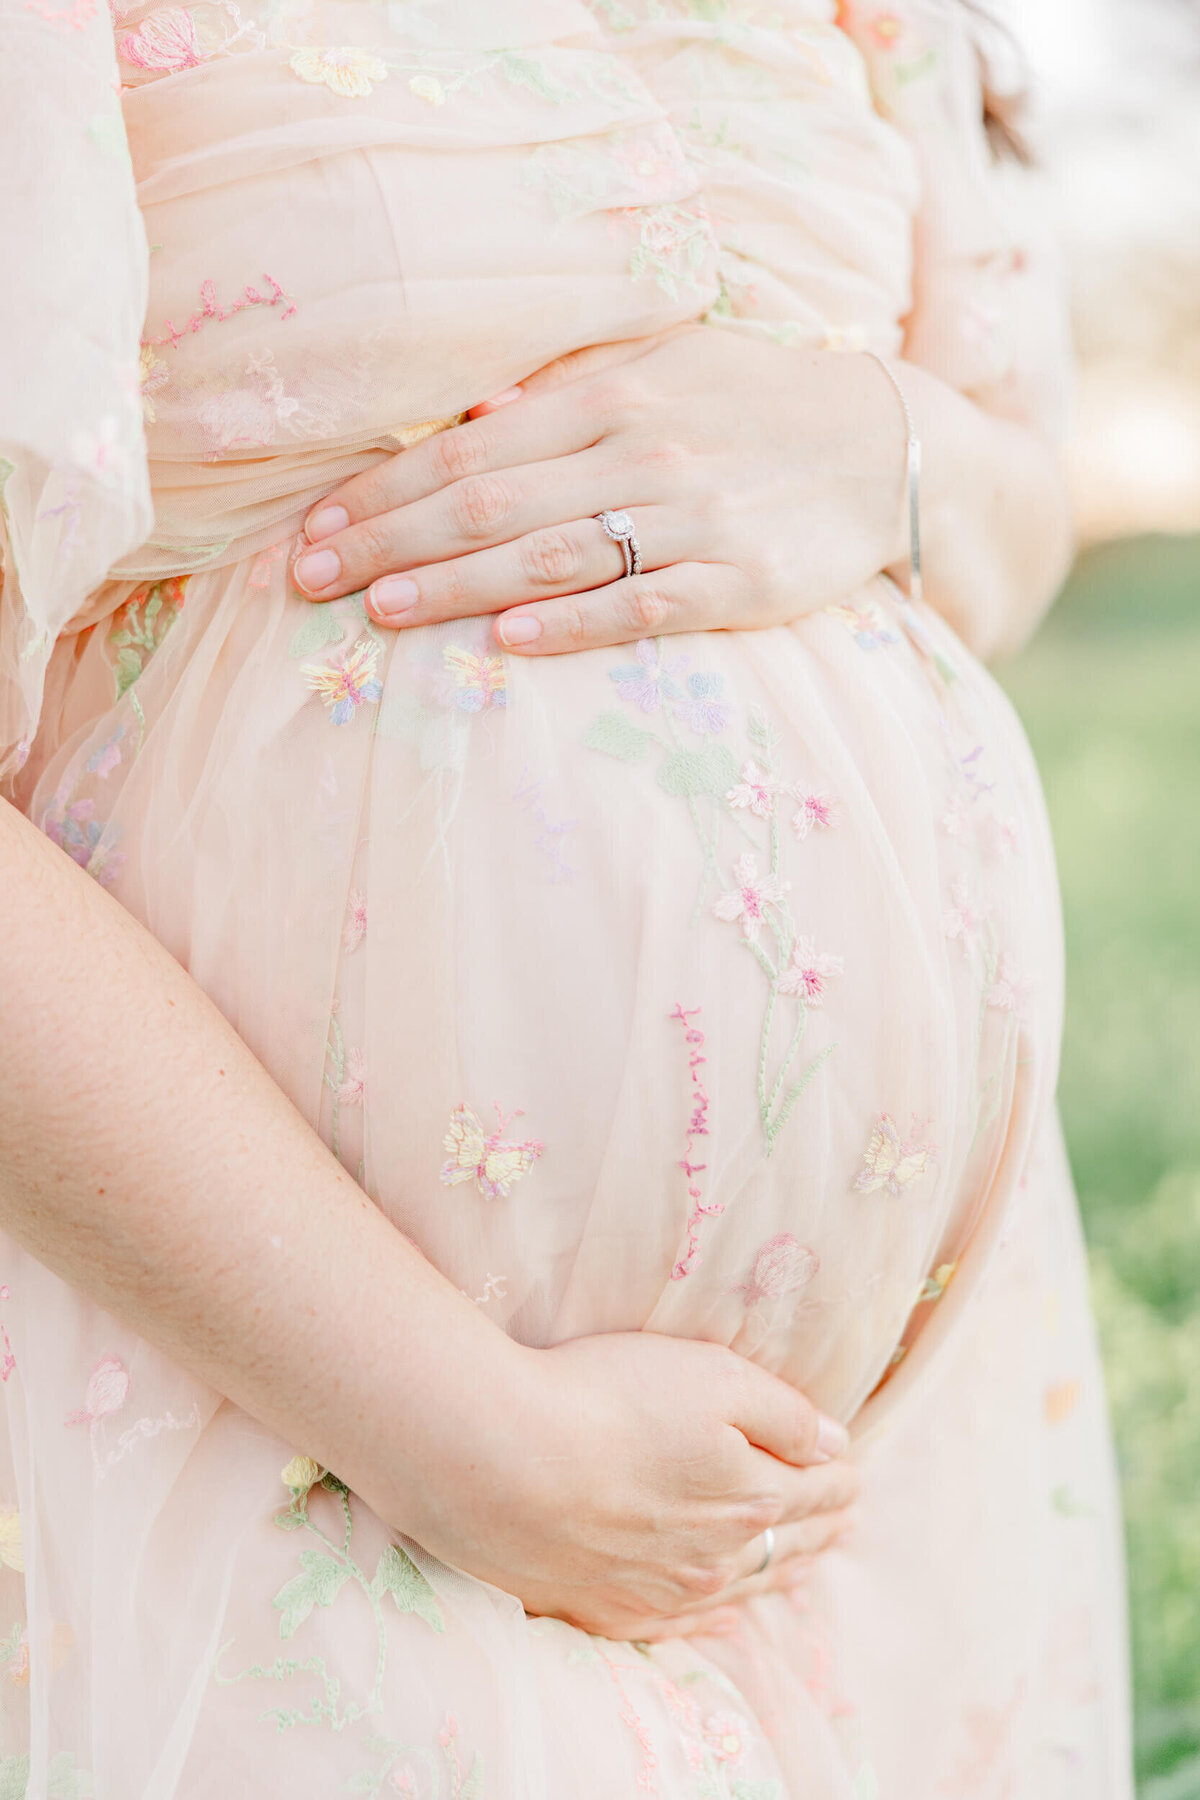 Closeup of the baby bump of a mama in a soft pink dress with a delicate embroidered floral pattern